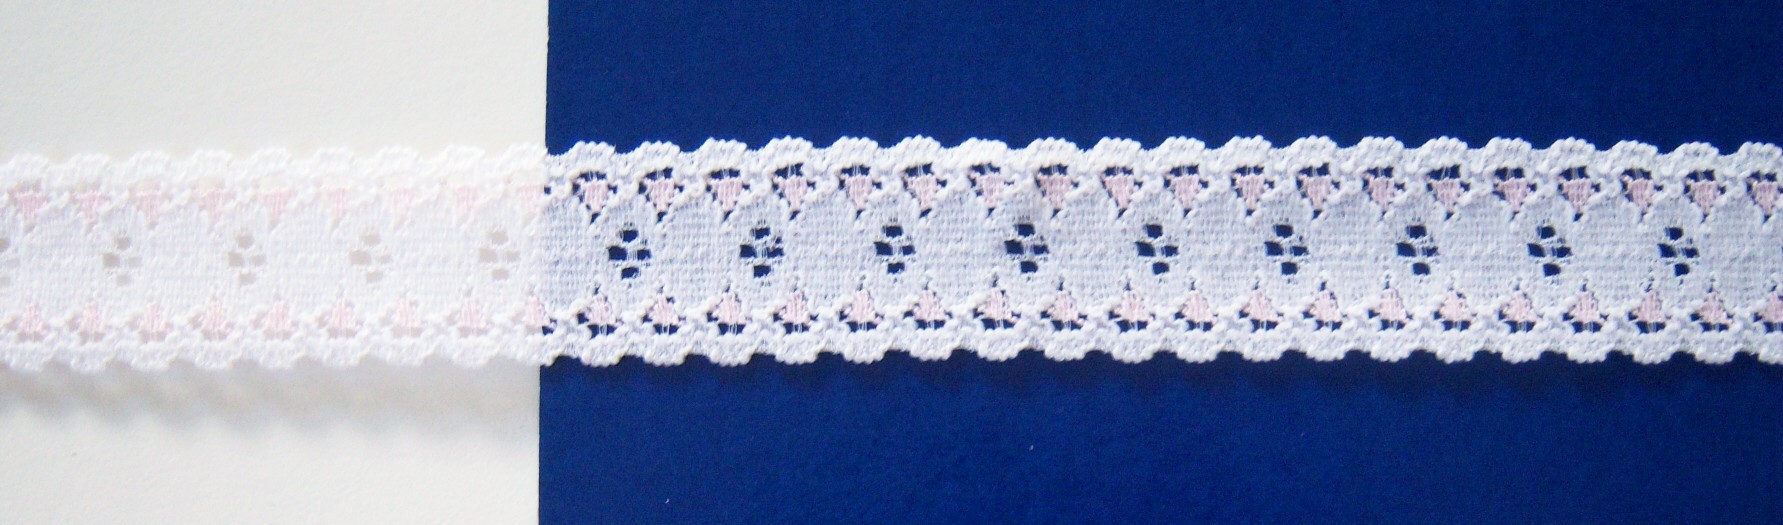 White/Pink 7/8" Stretch Lace